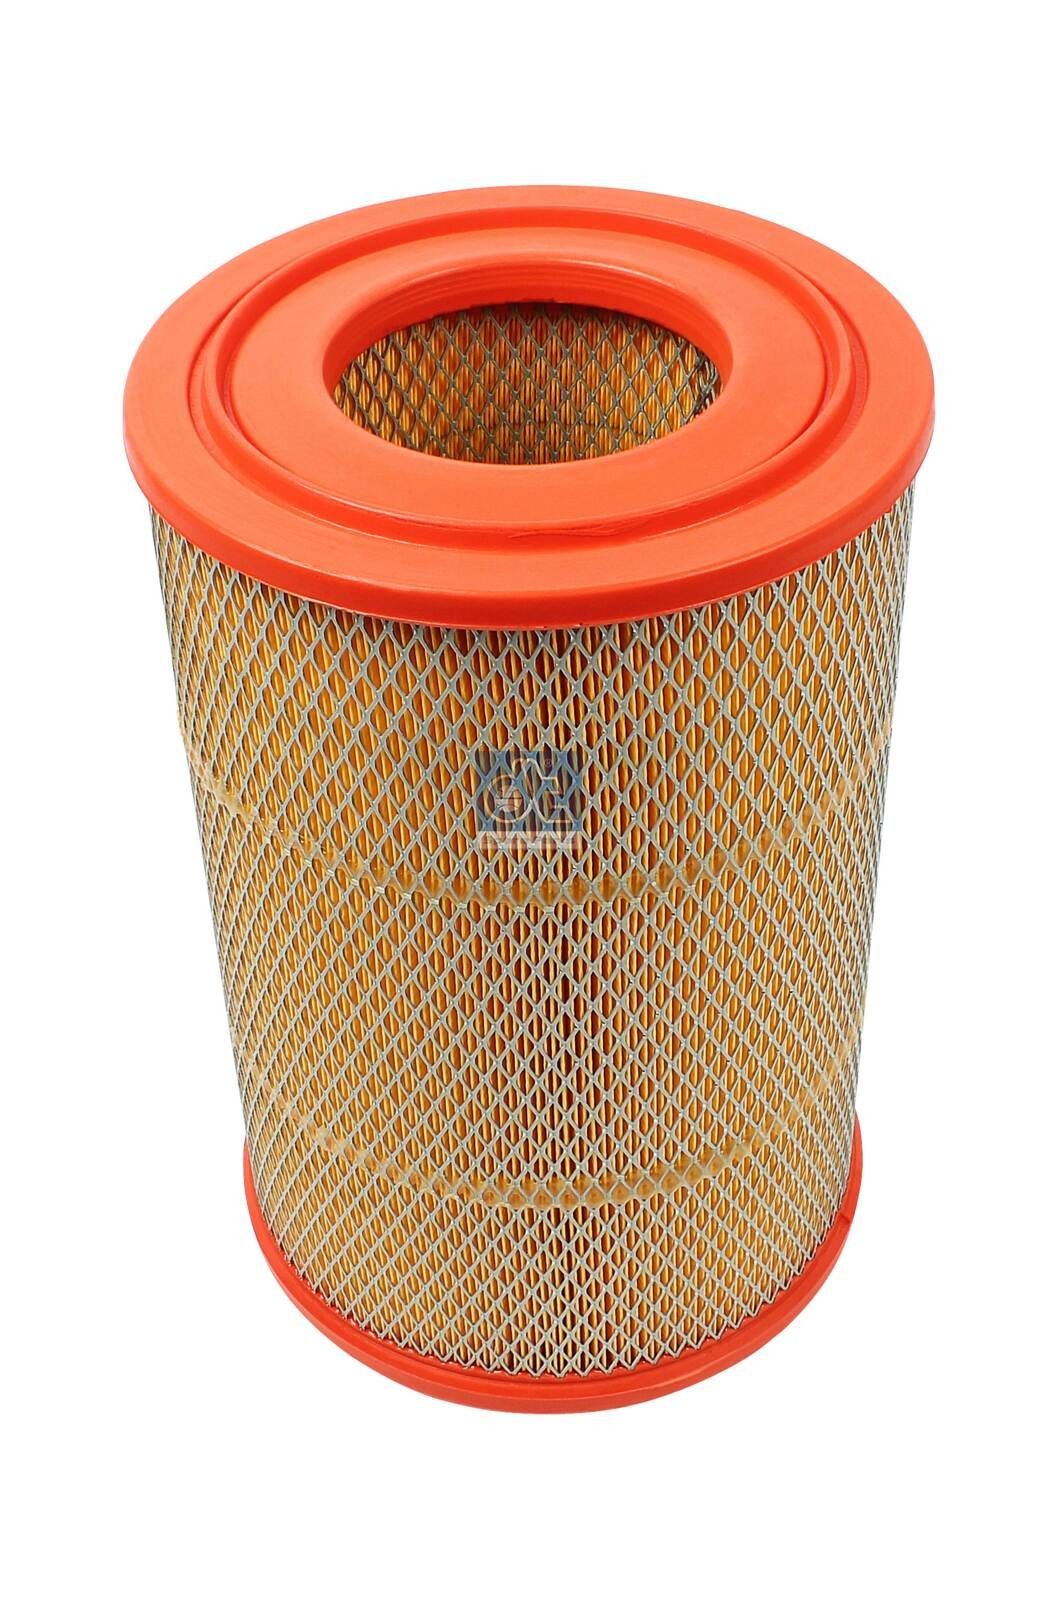 C 25 730/1 DT Spare Parts 381mm, 249mm, Filter Insert Height: 381mm Engine air filter 3.18507 buy